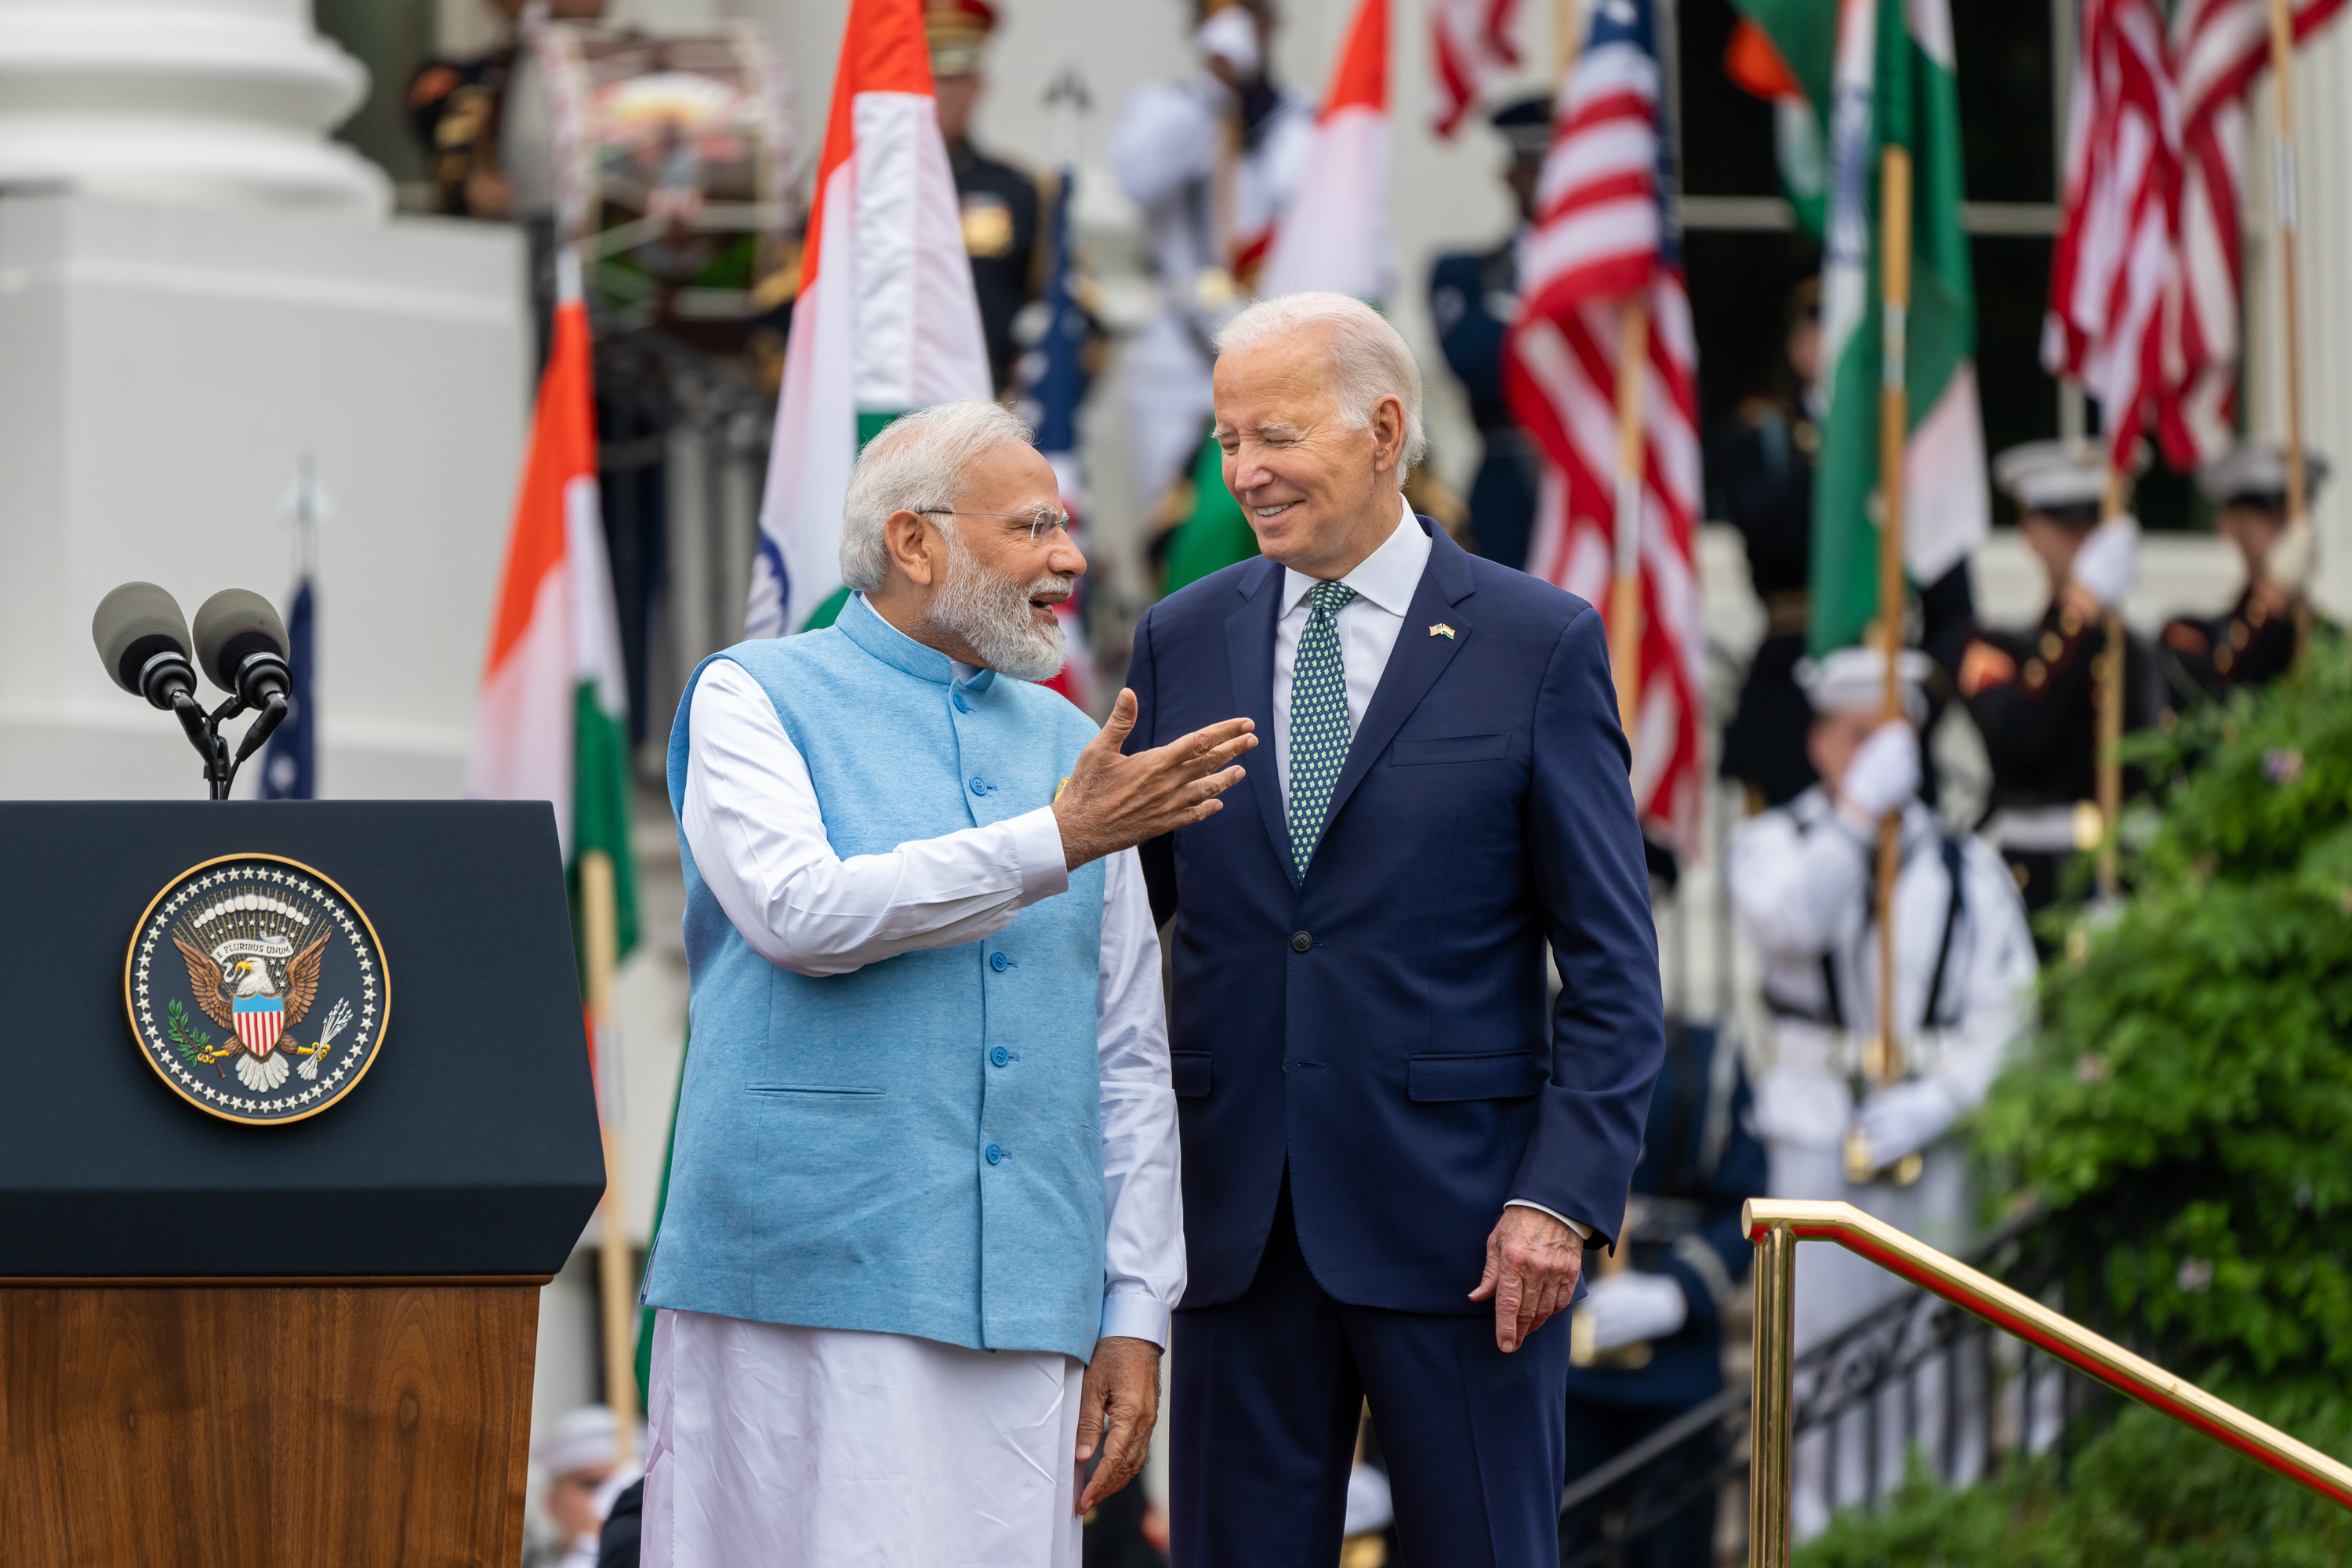 India's Prime Minister Narendra Modi speaks with President Joe Biden during a State Arrival Ceremony on the South Lawn of the White House.